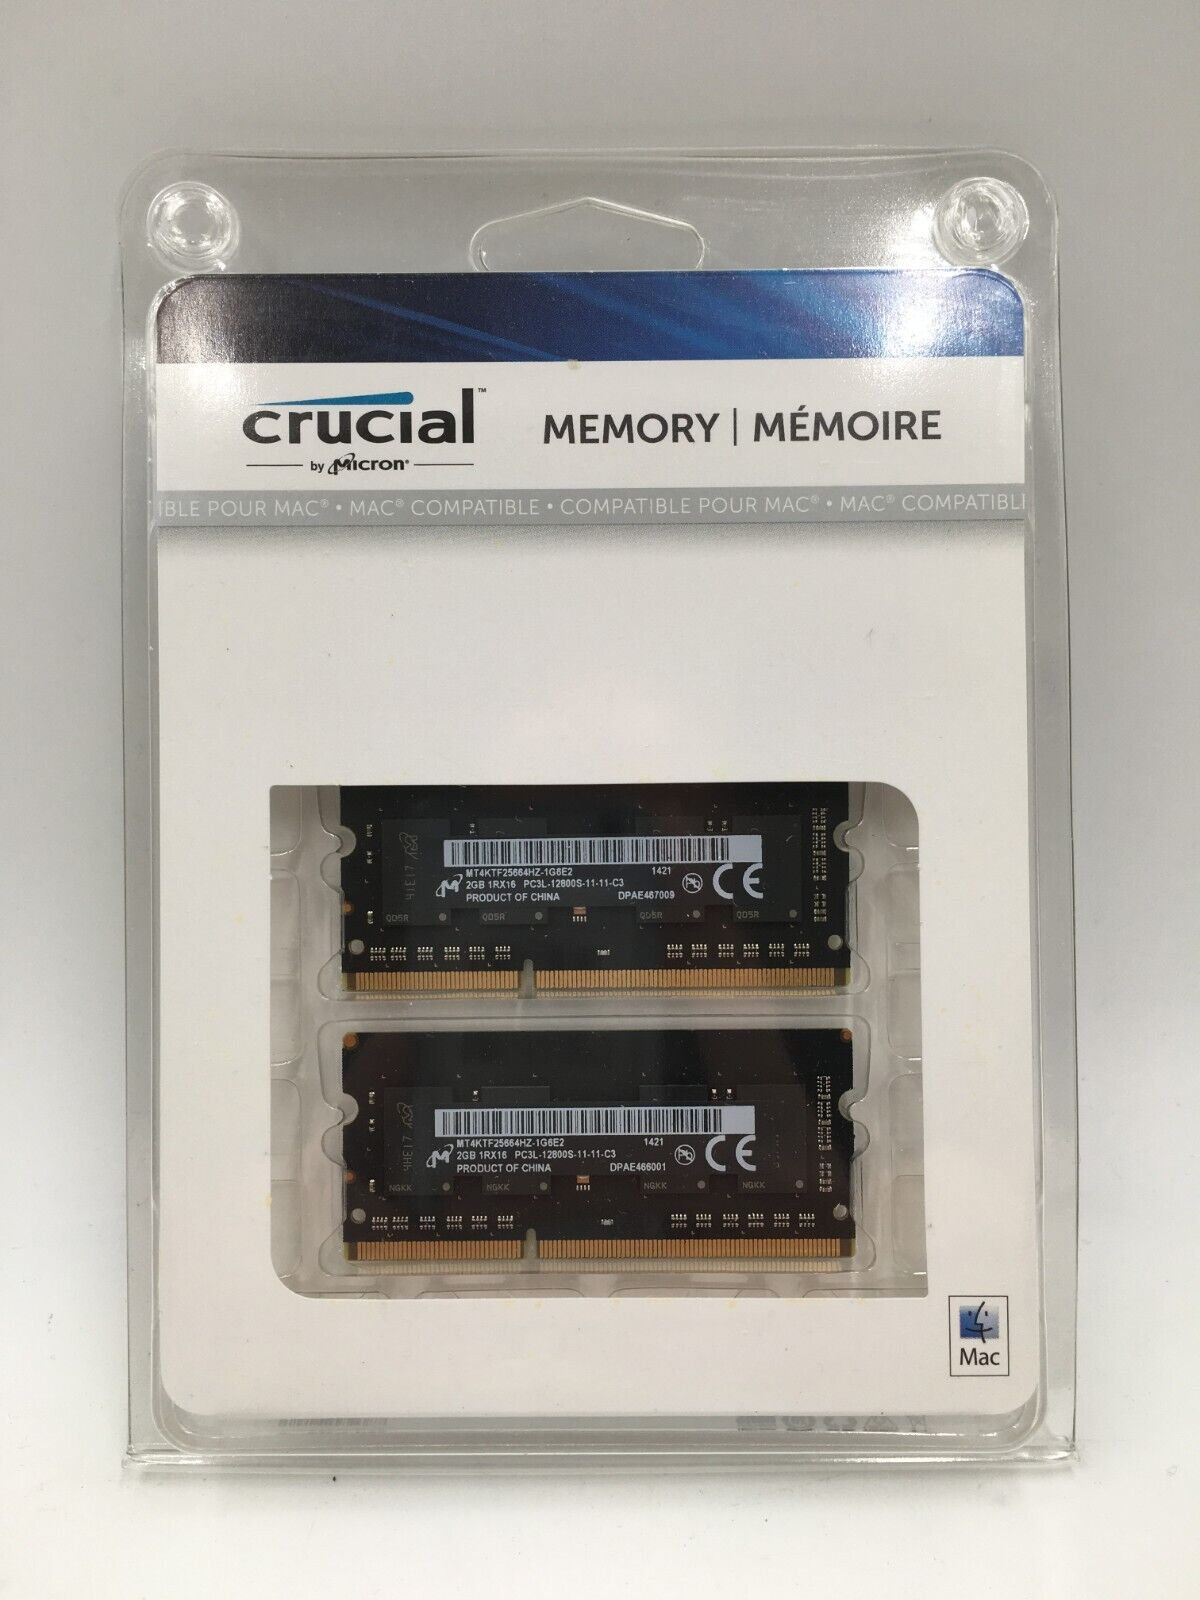 Crucial by Micron Mac Compatible Memory 2 X 4GB CRM-9128 8GB 